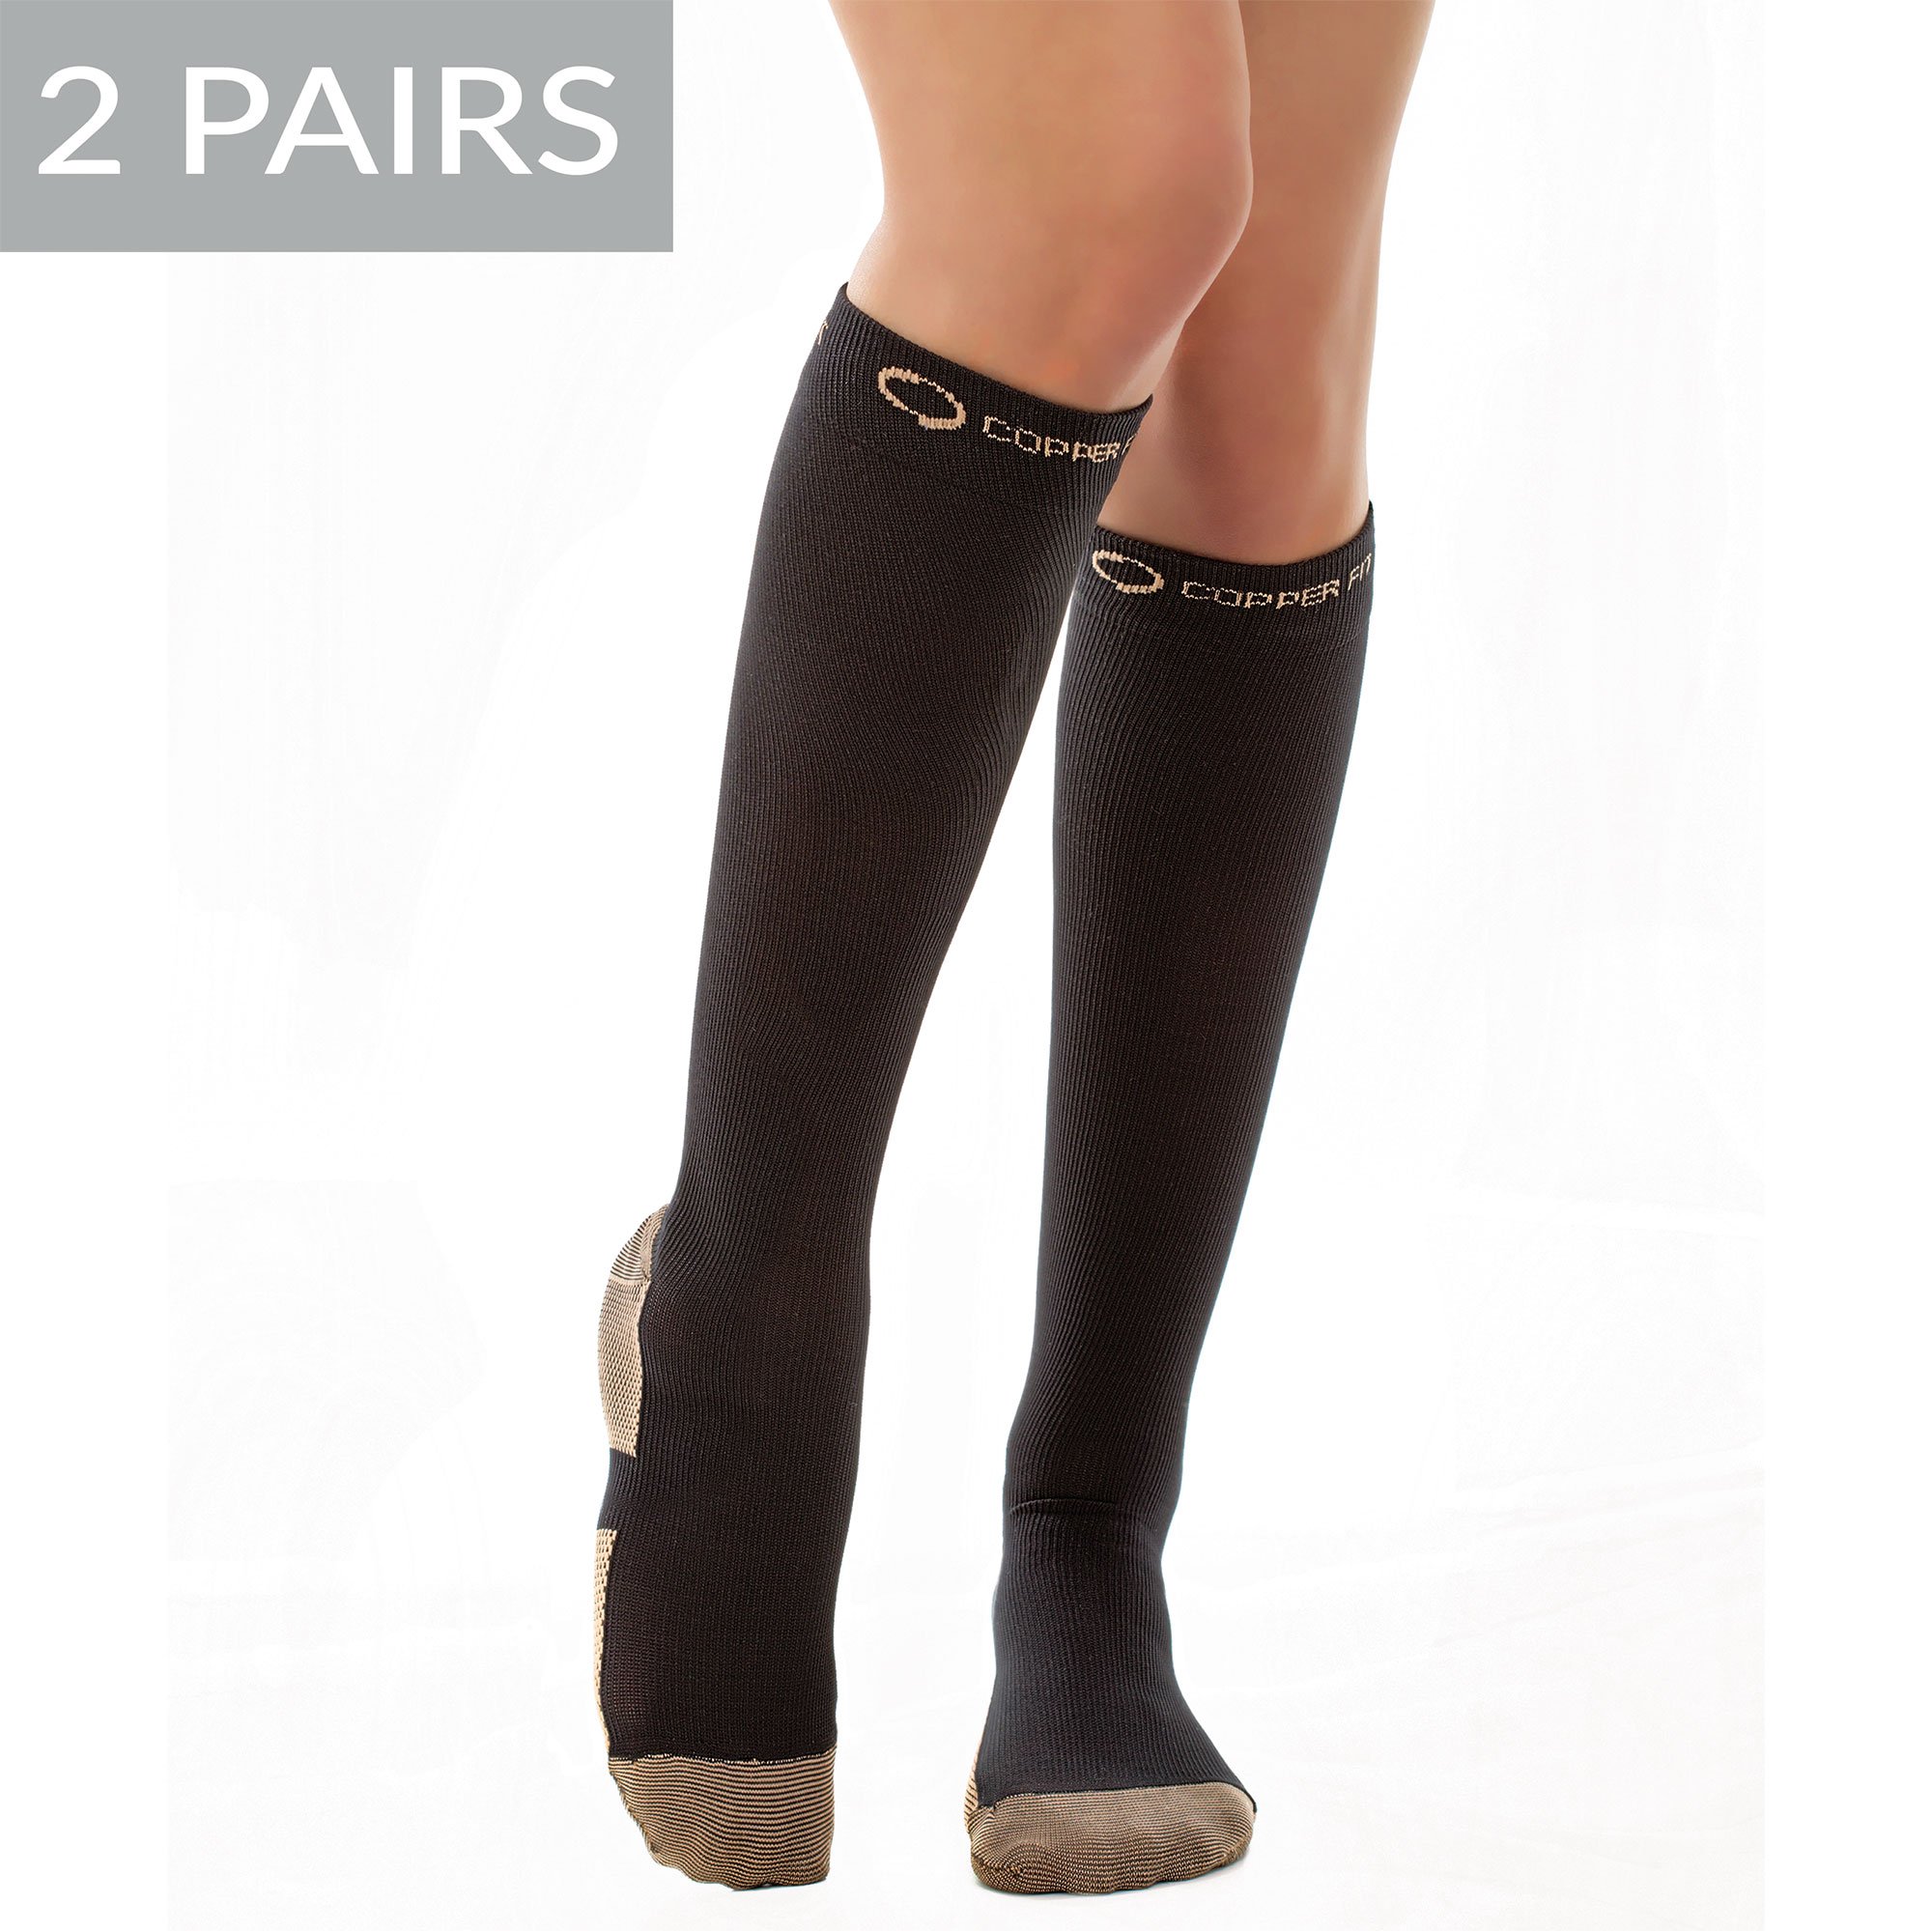 Copper Fit Energy Compression Socks - 2 Pair